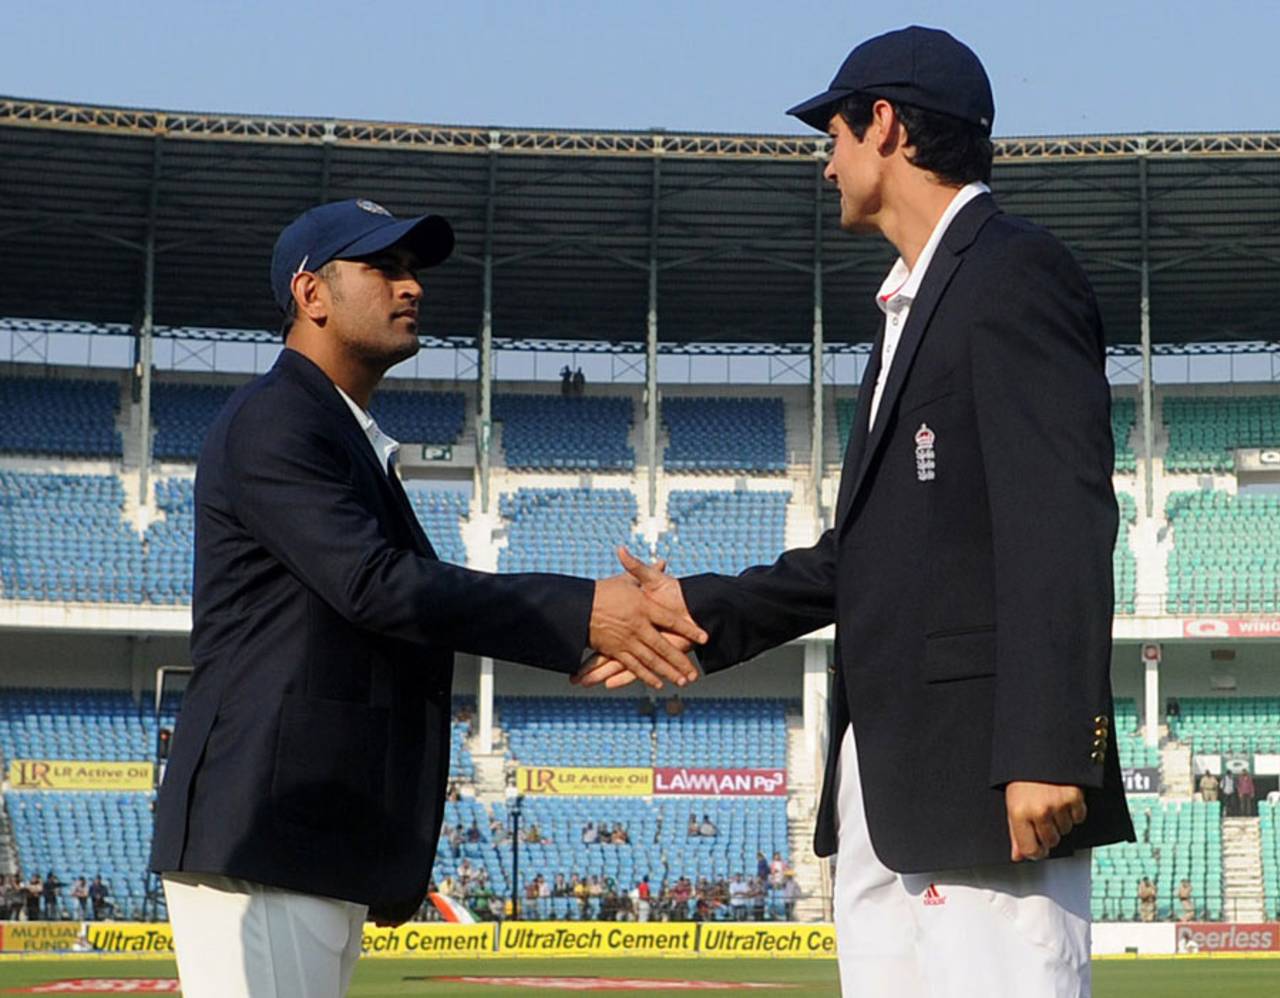 MS Dhoni and Alastair Cook shake hands at the toss, India v England, 4th Test, Nagpur, 1st day, December 13, 2012